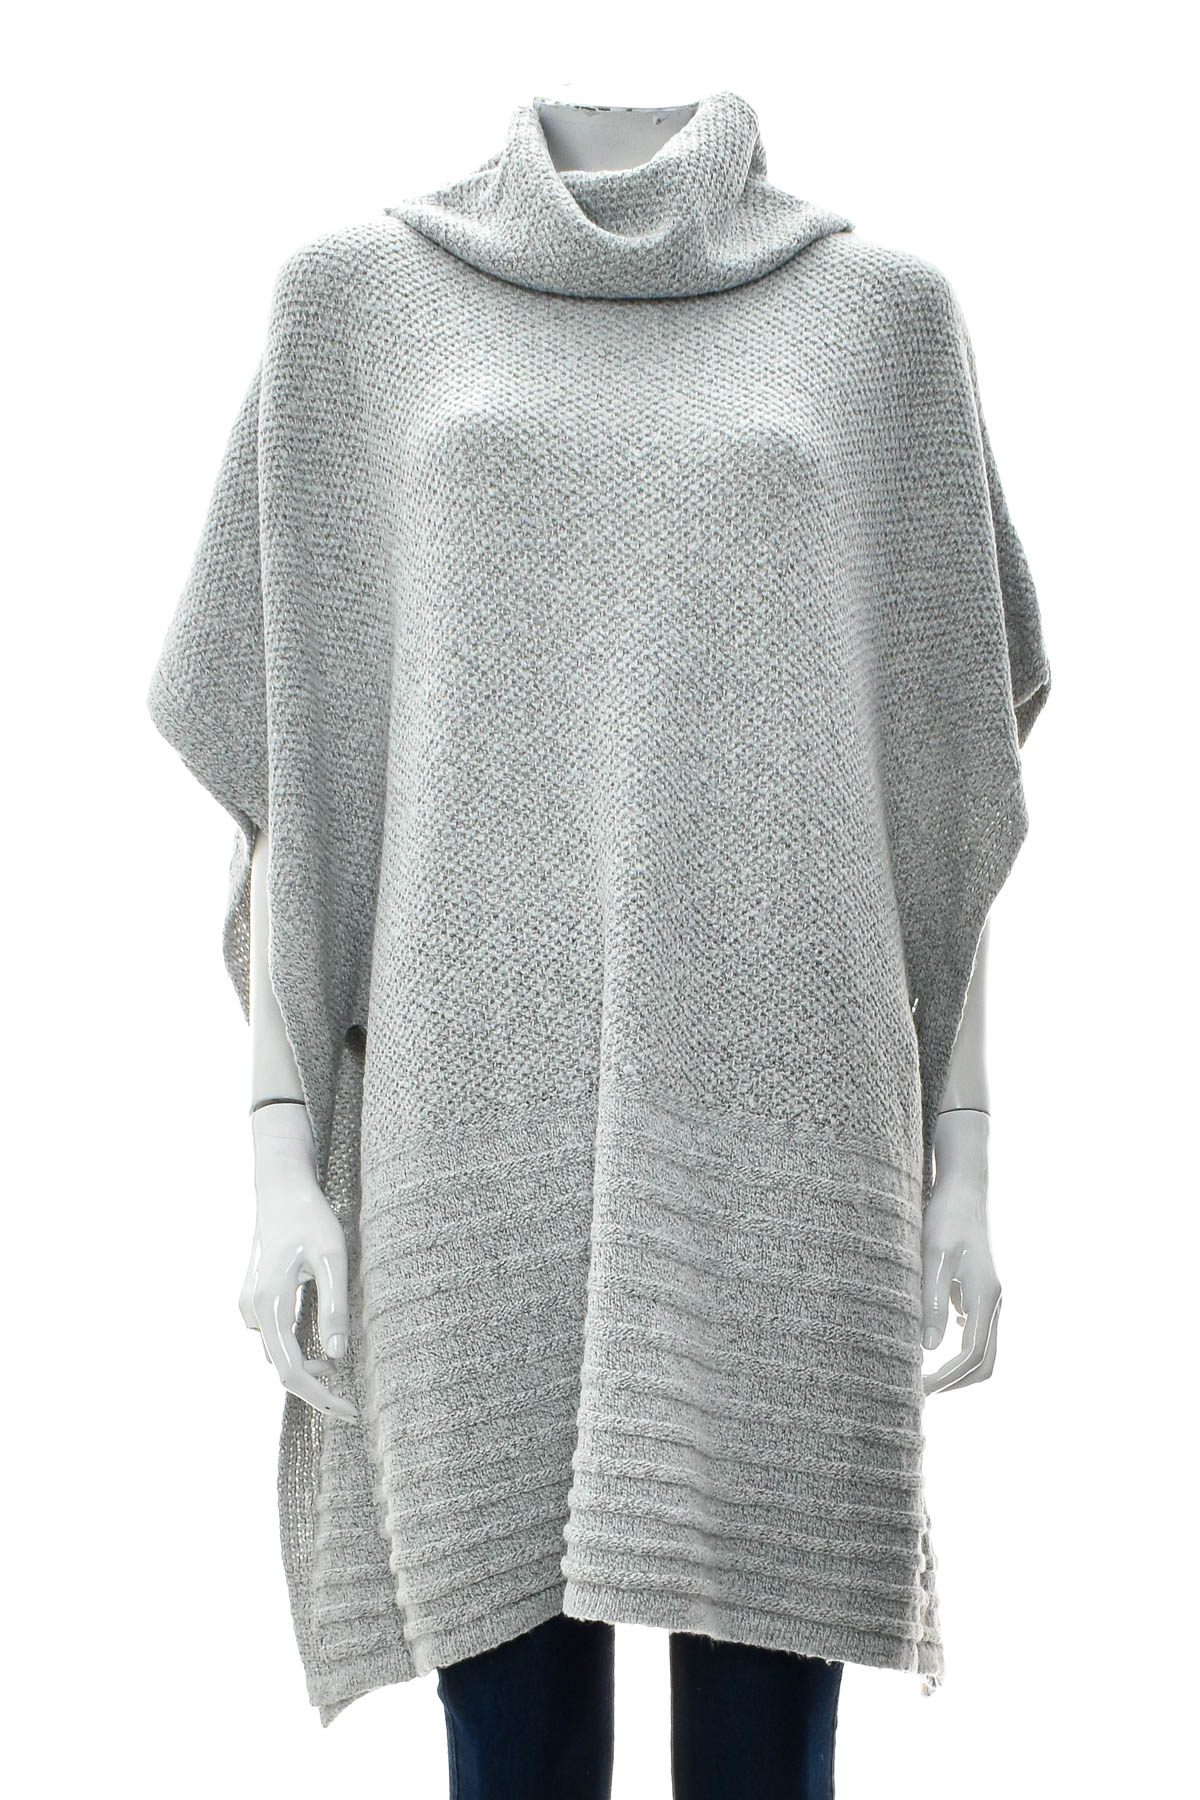 Women's sweater - B Collection - 0